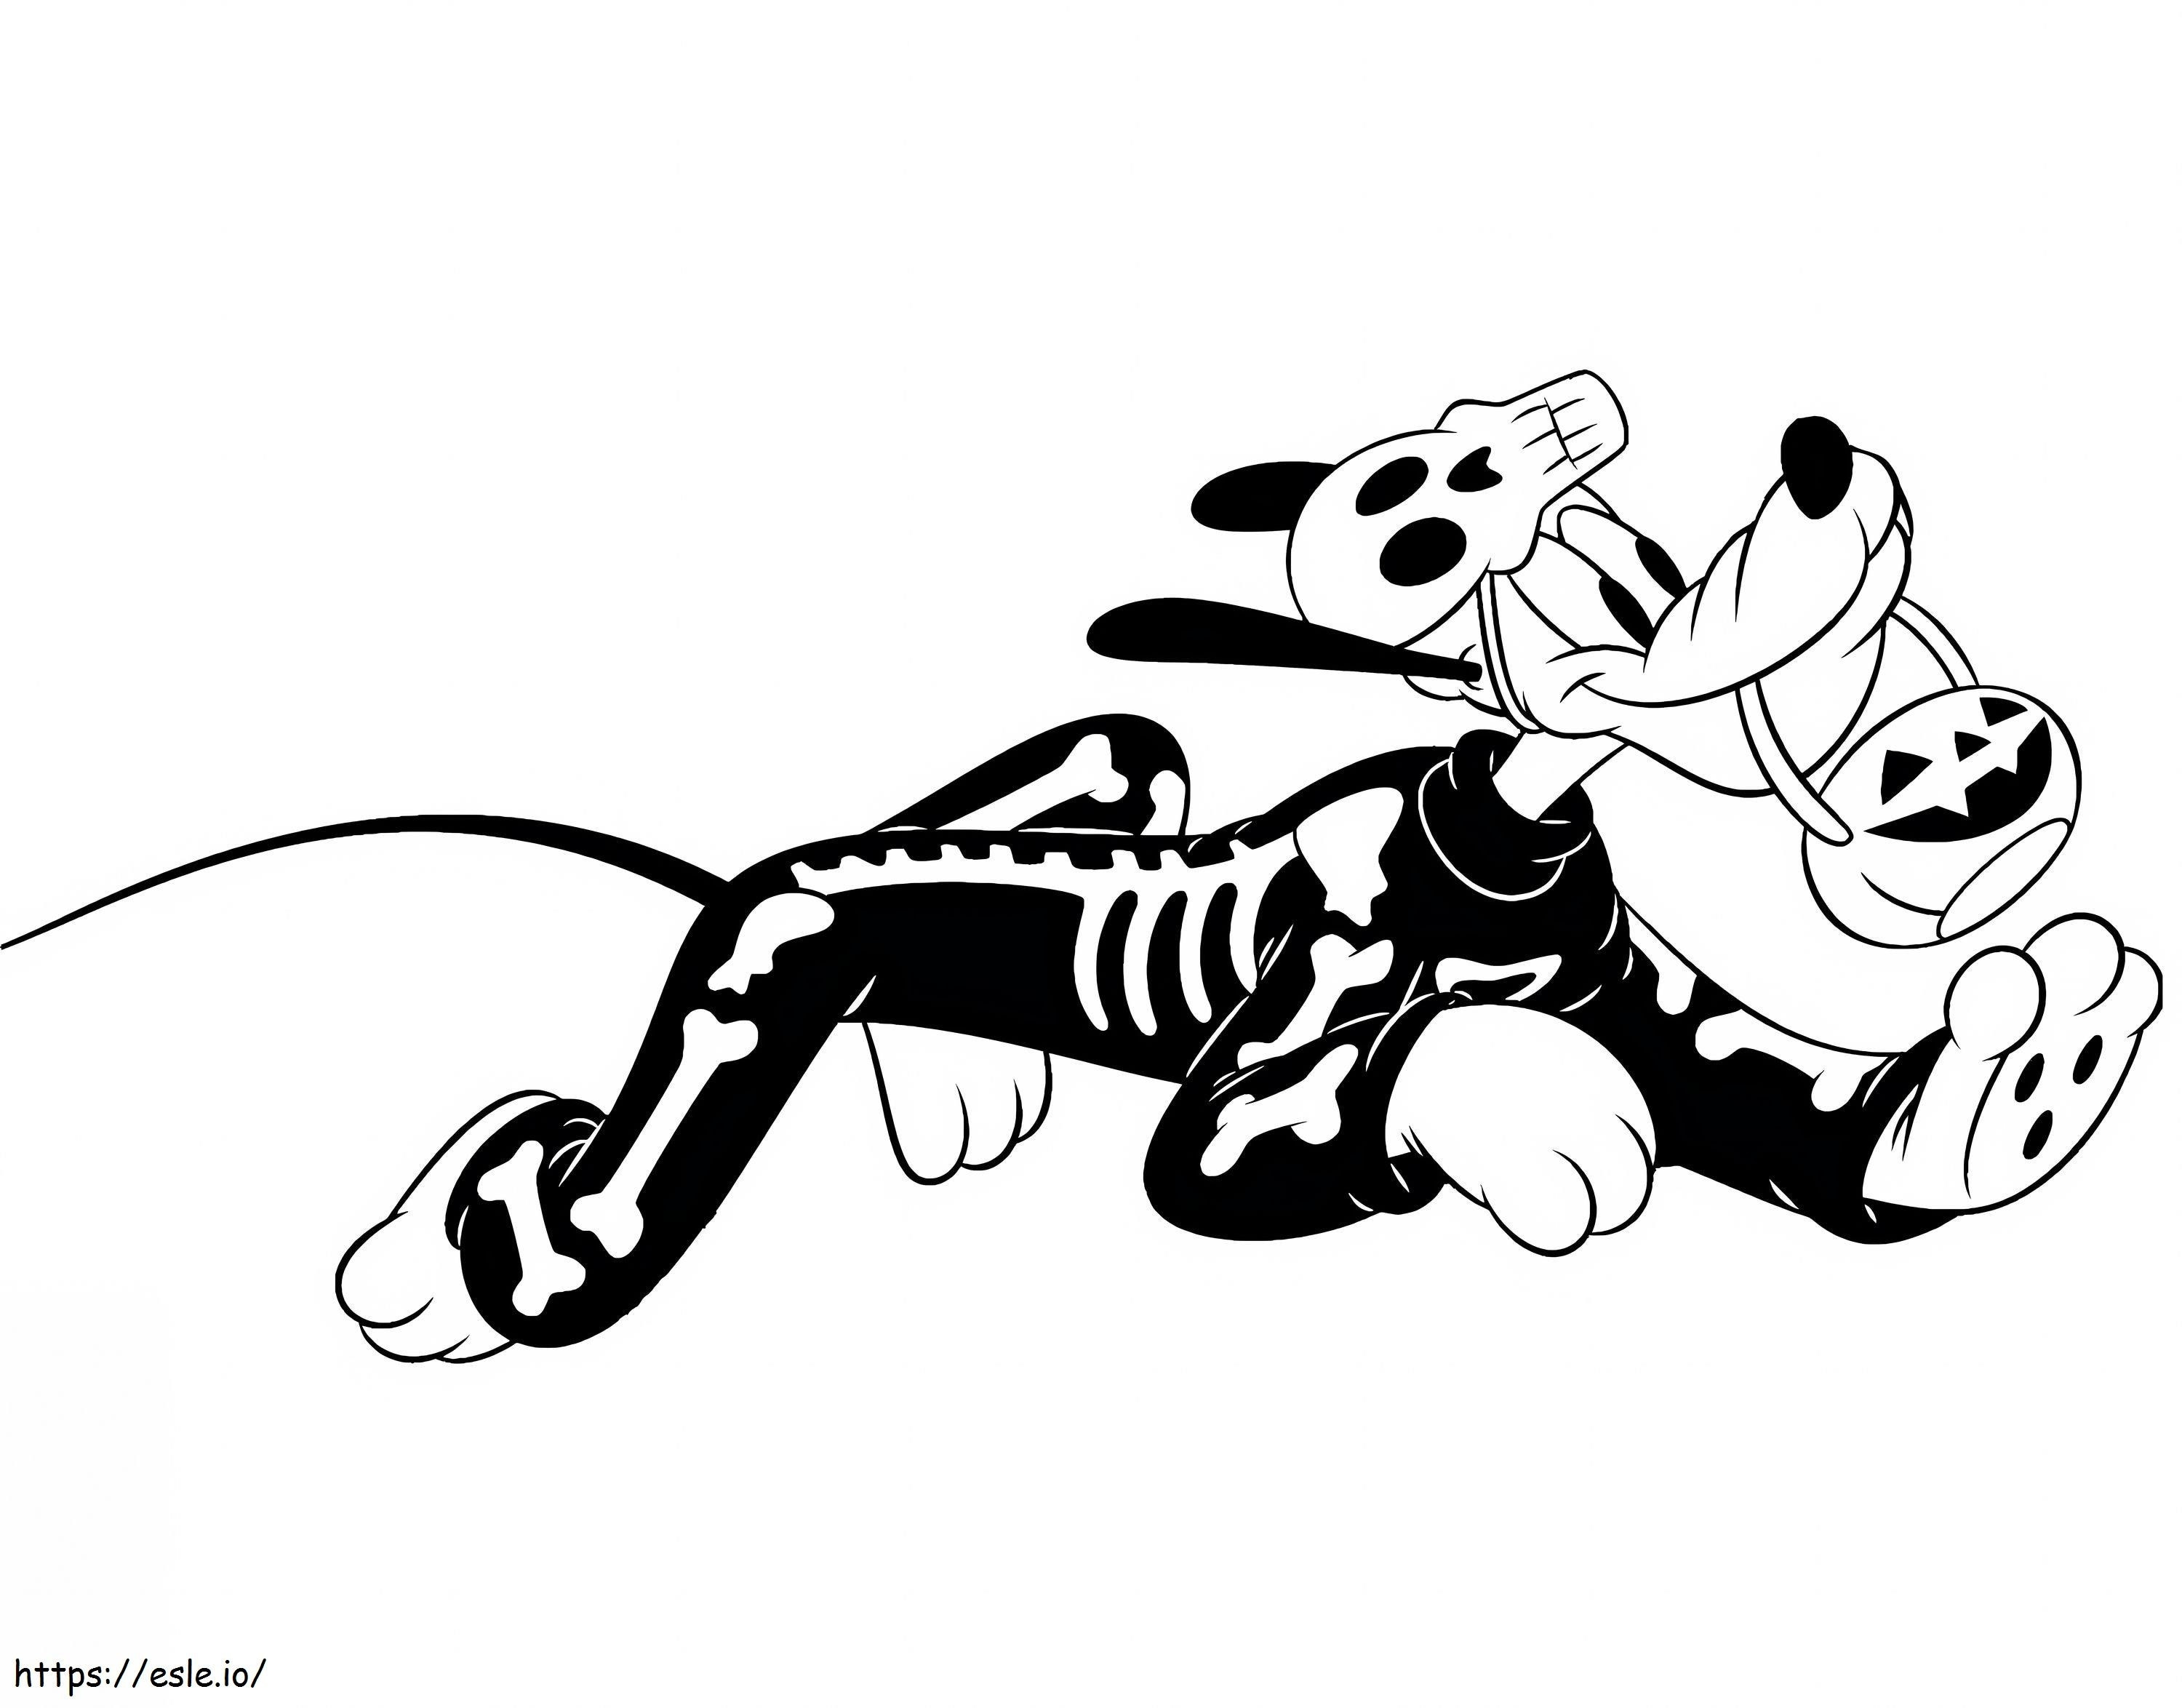 Fun Pluto On Halloween coloring page